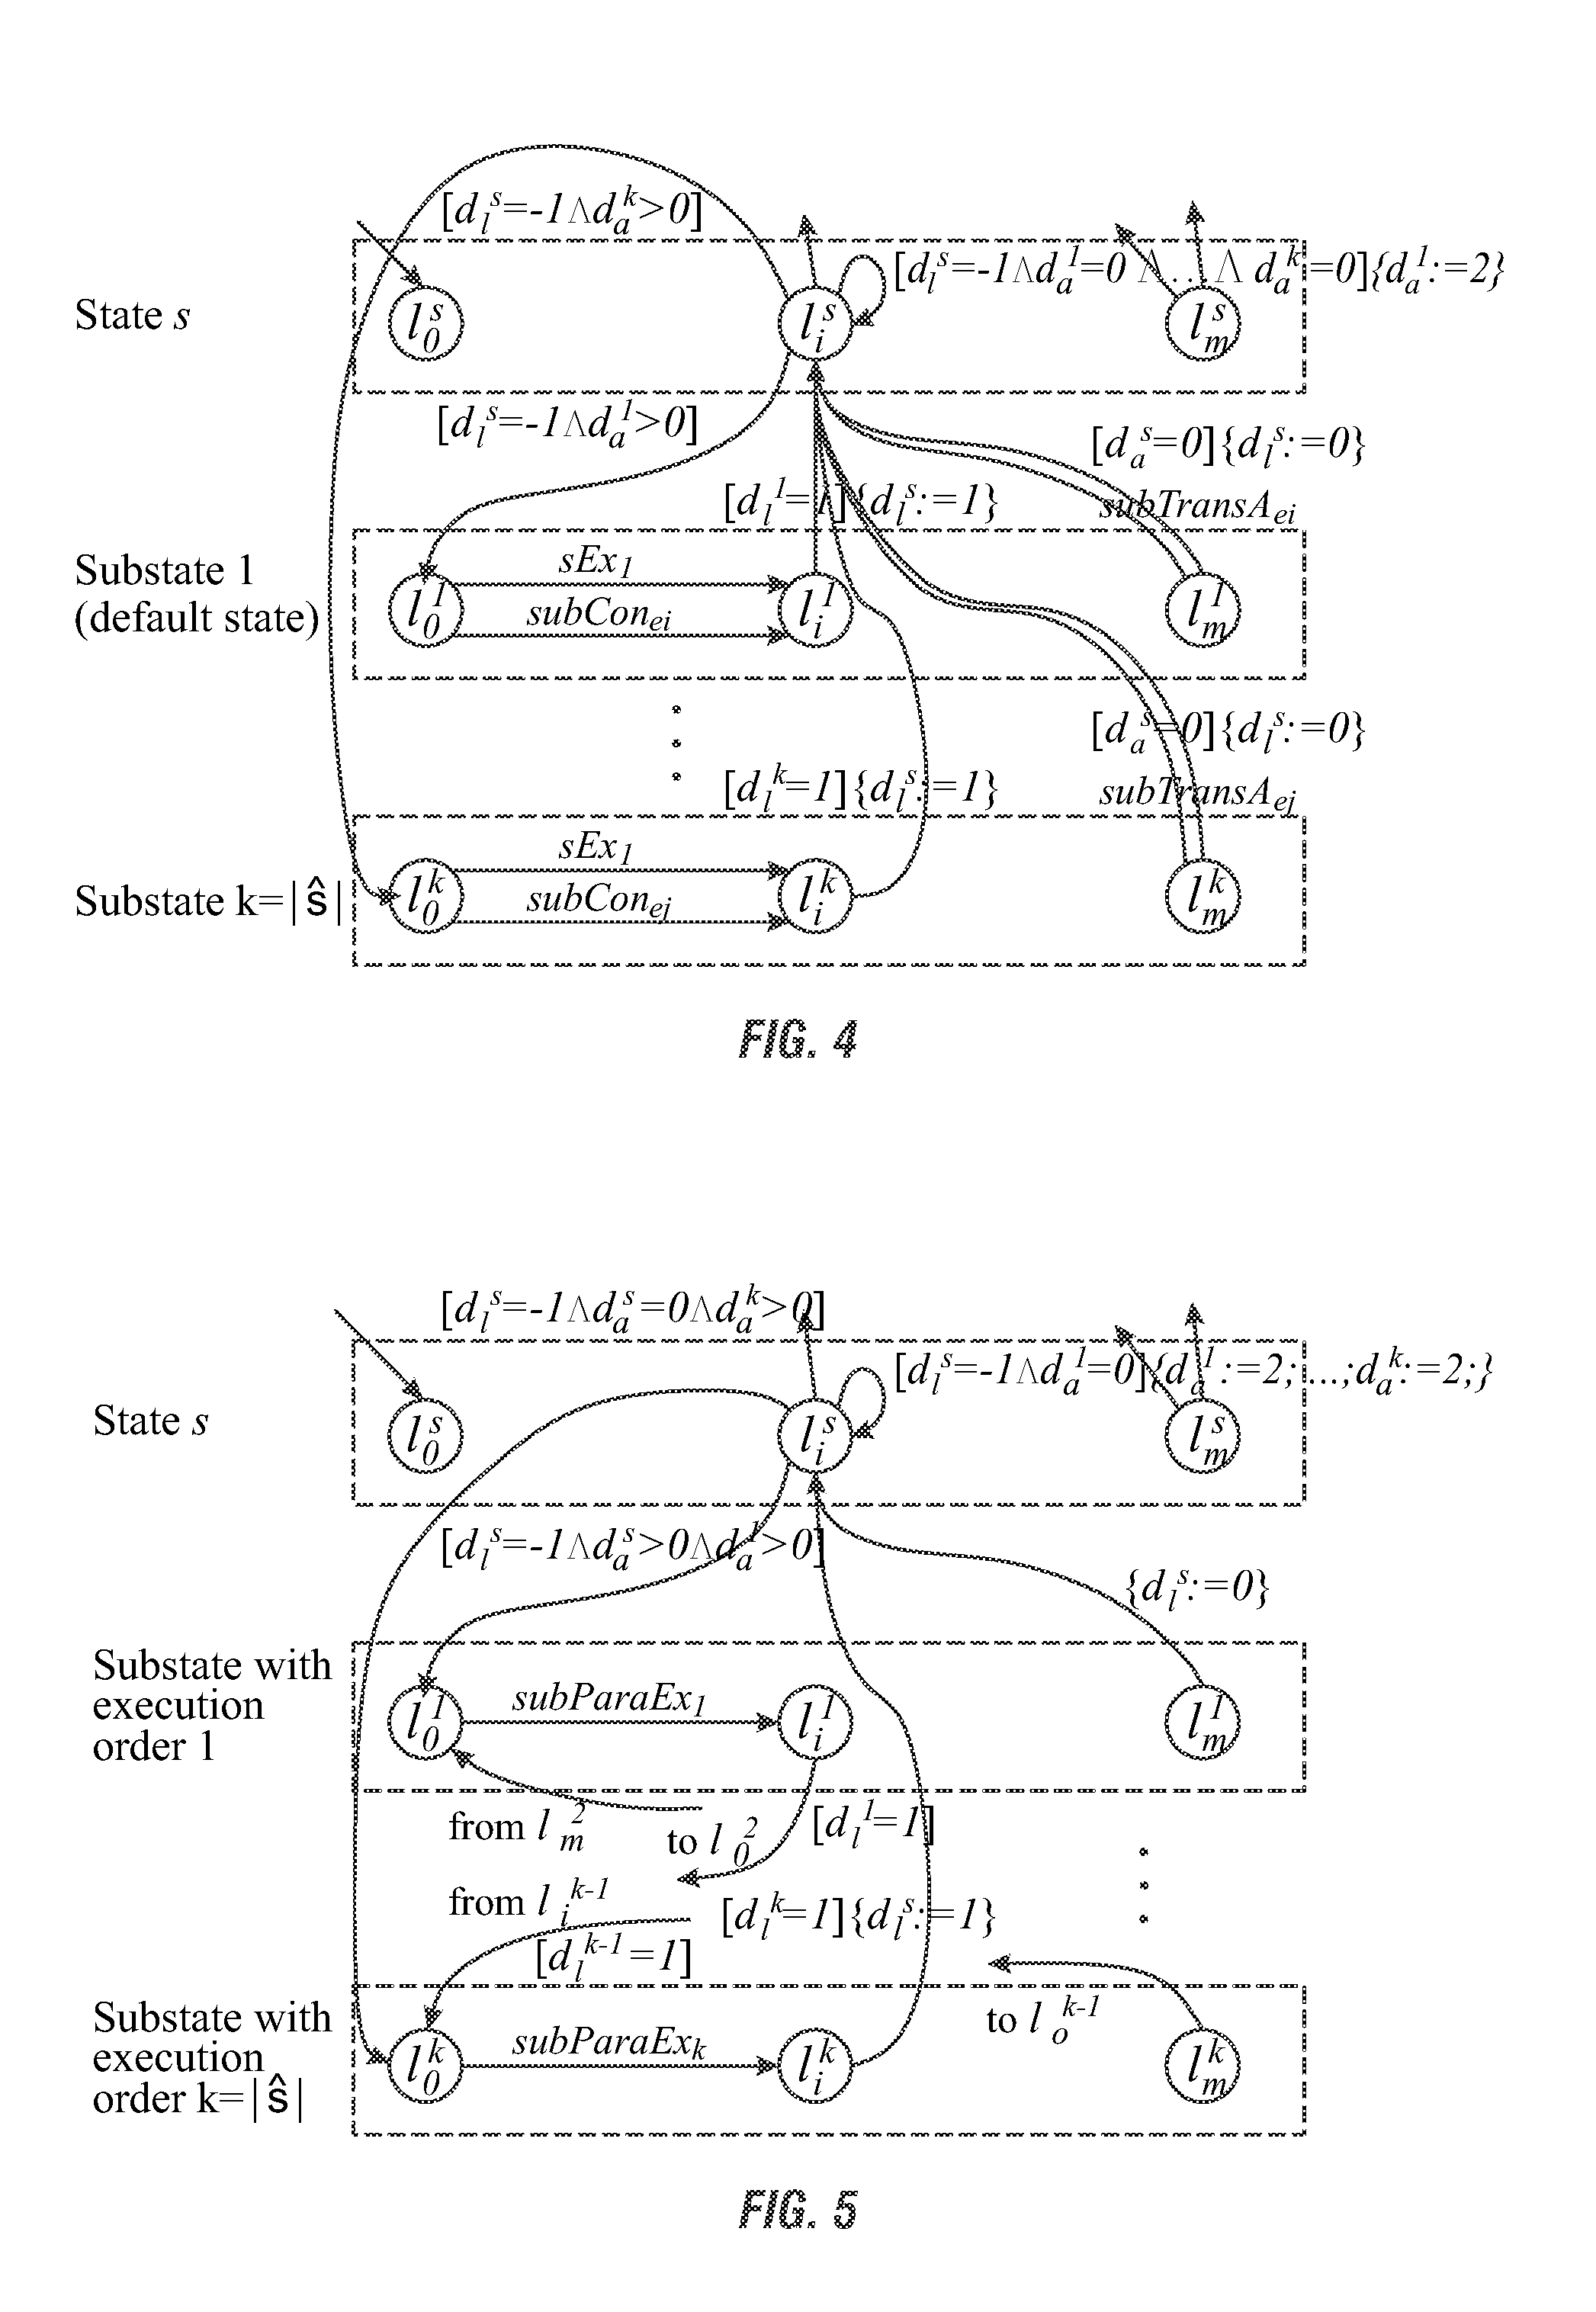 Semantic translation of stateflow diagrams into input/output extended finite automata and automated test generation for simulink/stateflow diagrams